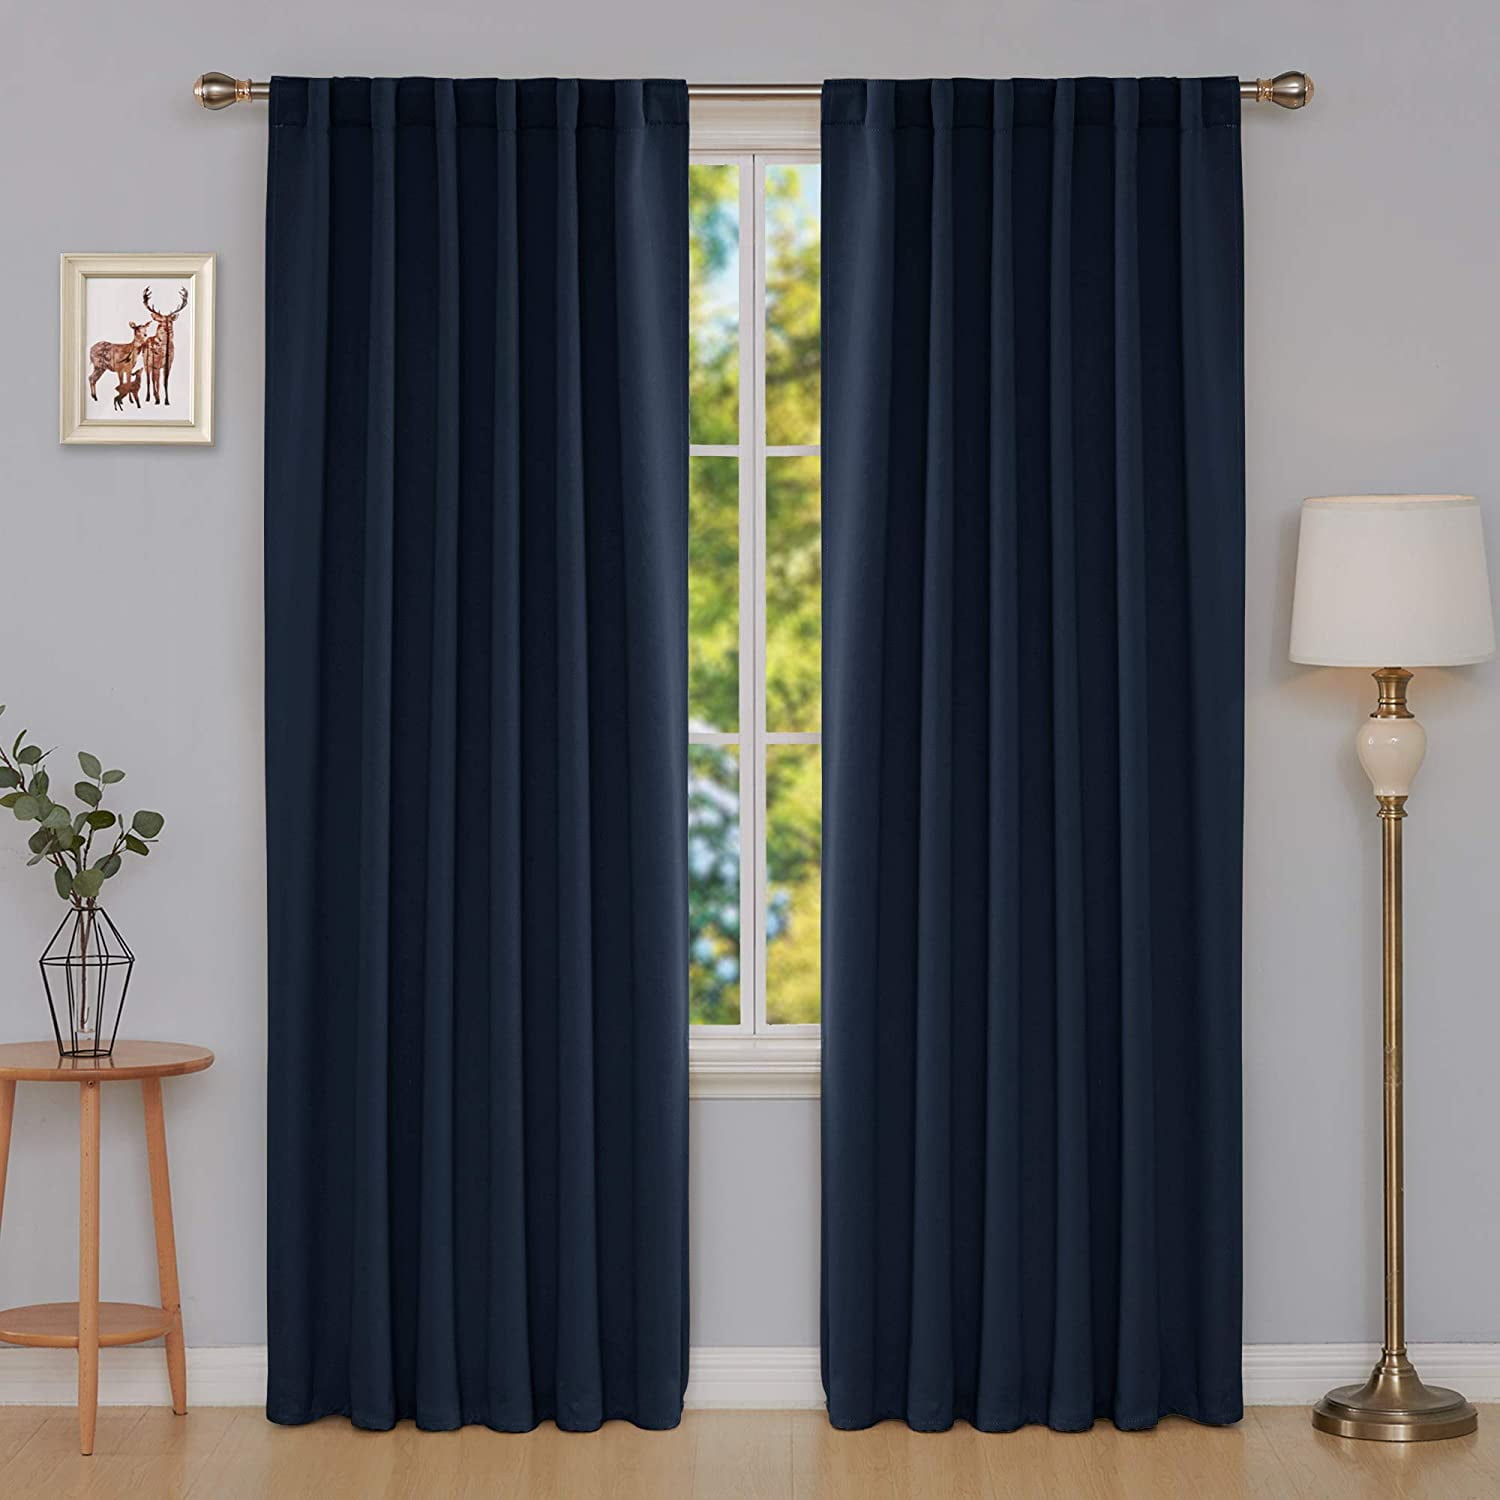 Deconovo Solid Back Tab and Rod Pocket Curtains Blackout Curtains